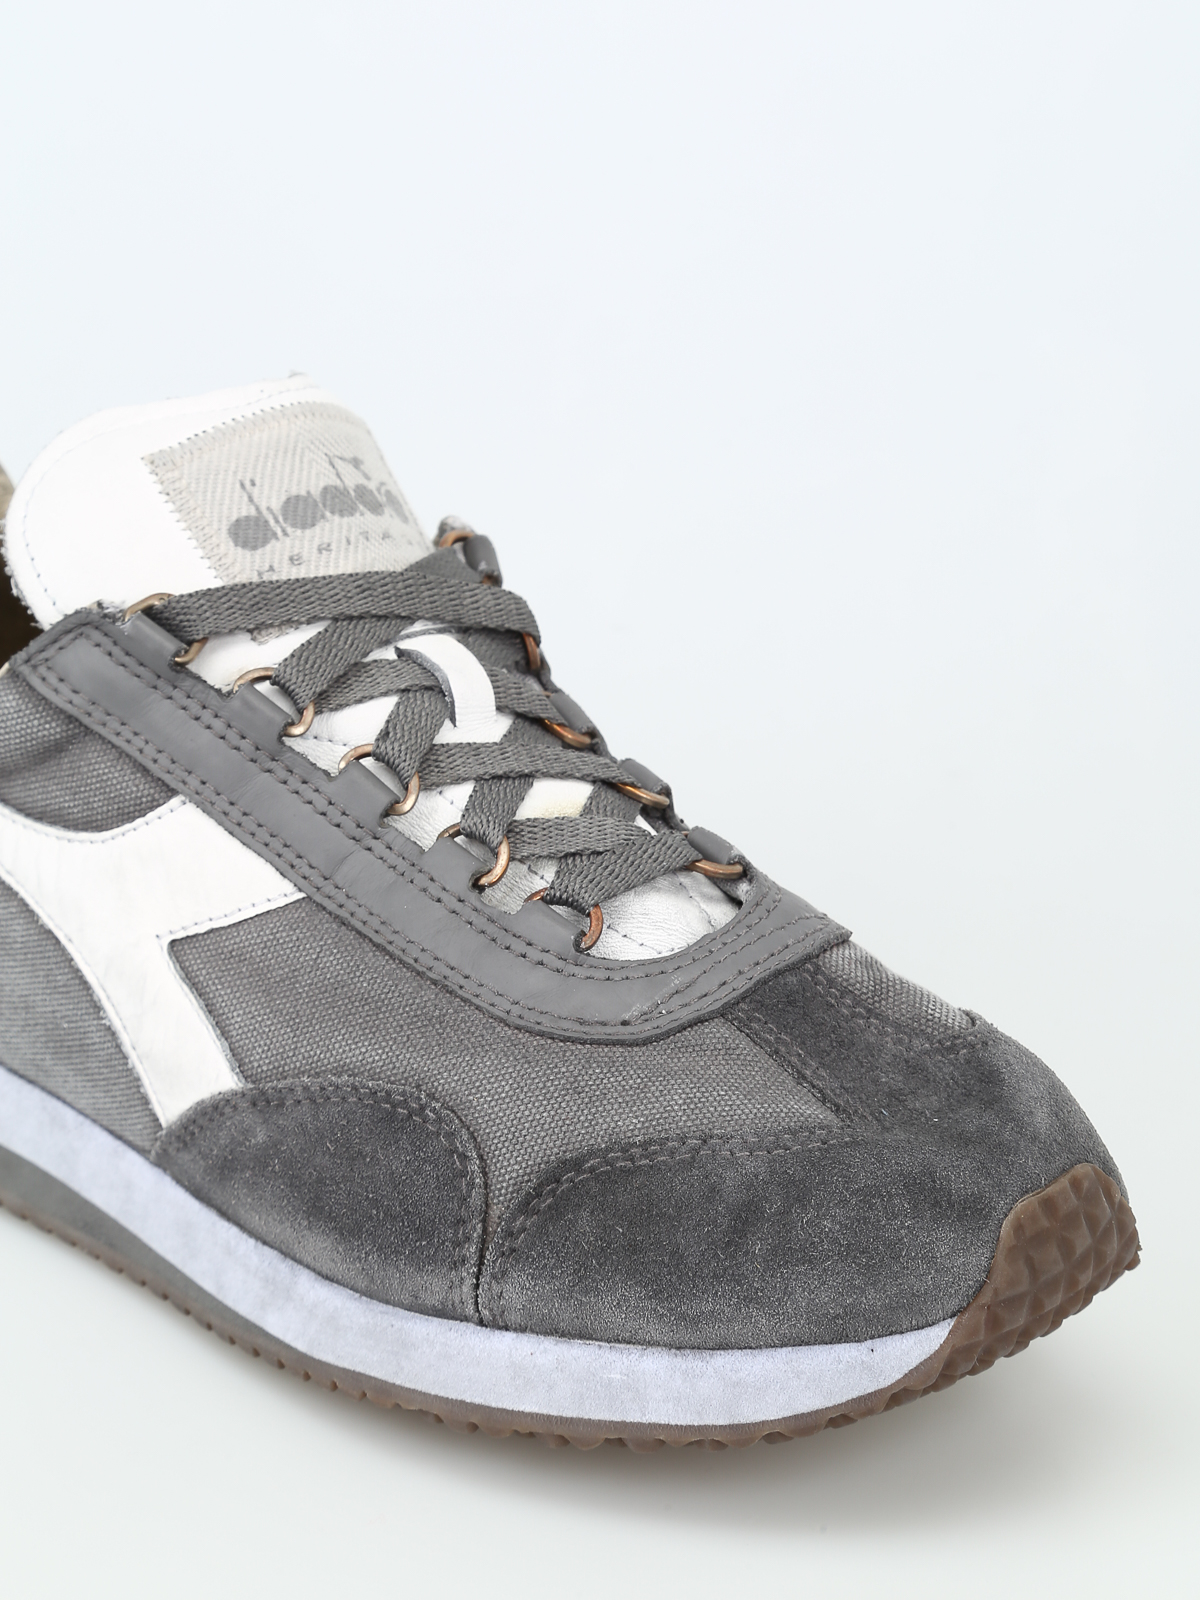 Diadora Heritage - Grey Equipe SW Dirty Evo sneakers - trainers -  2011738990175069